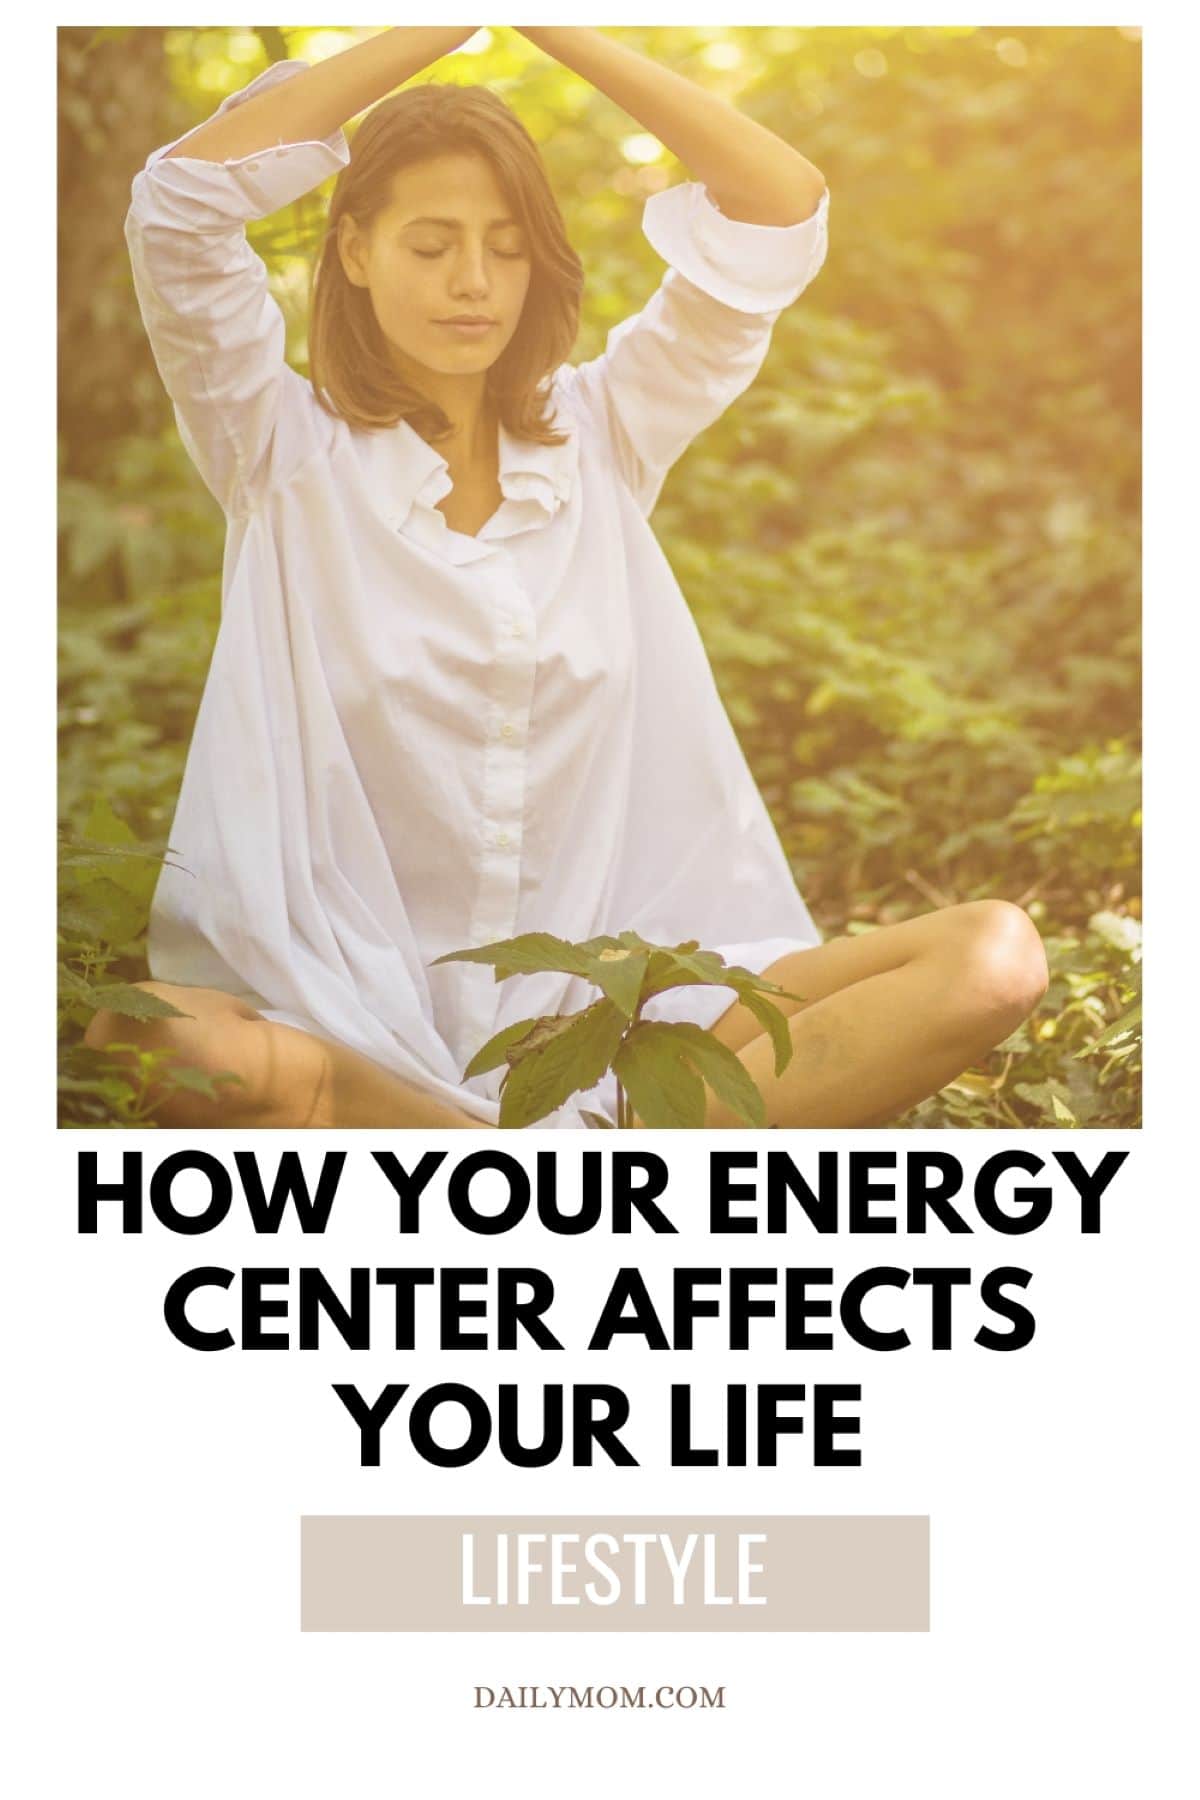 Maximize Your Human Design Centers: The 9 Human Design Energy Centers And How To Understand Your Human Design Chart 6 Daily Mom, Magazine For Families